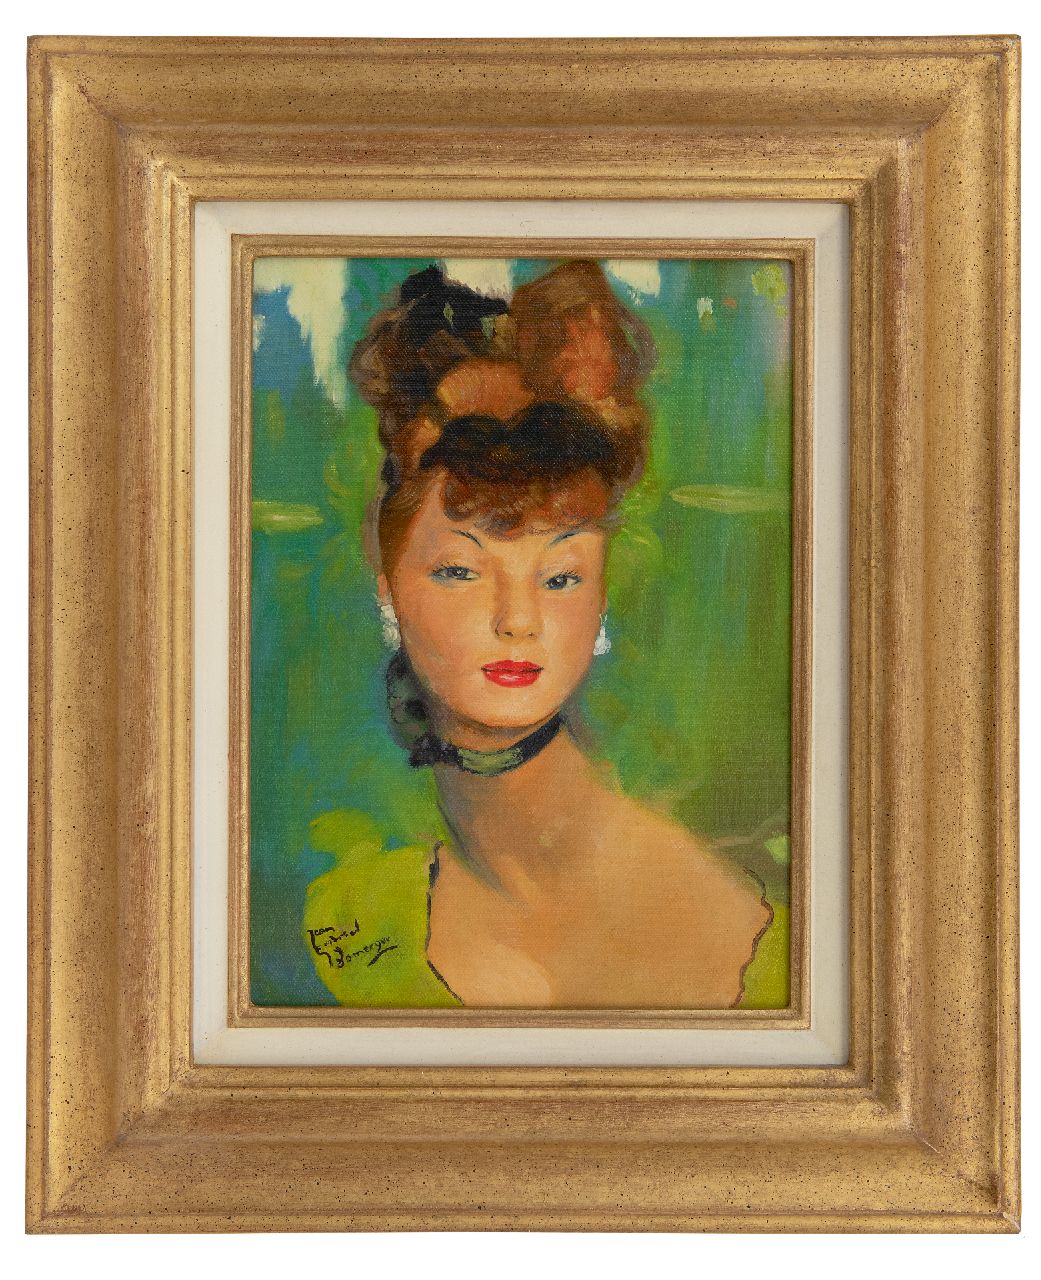 Domergue J.G.  | Jean-Gabriel Domergue | Paintings offered for sale | Young woman dressed in green, oil on canvas 33.5 x 24.0 cm, signed l.l.